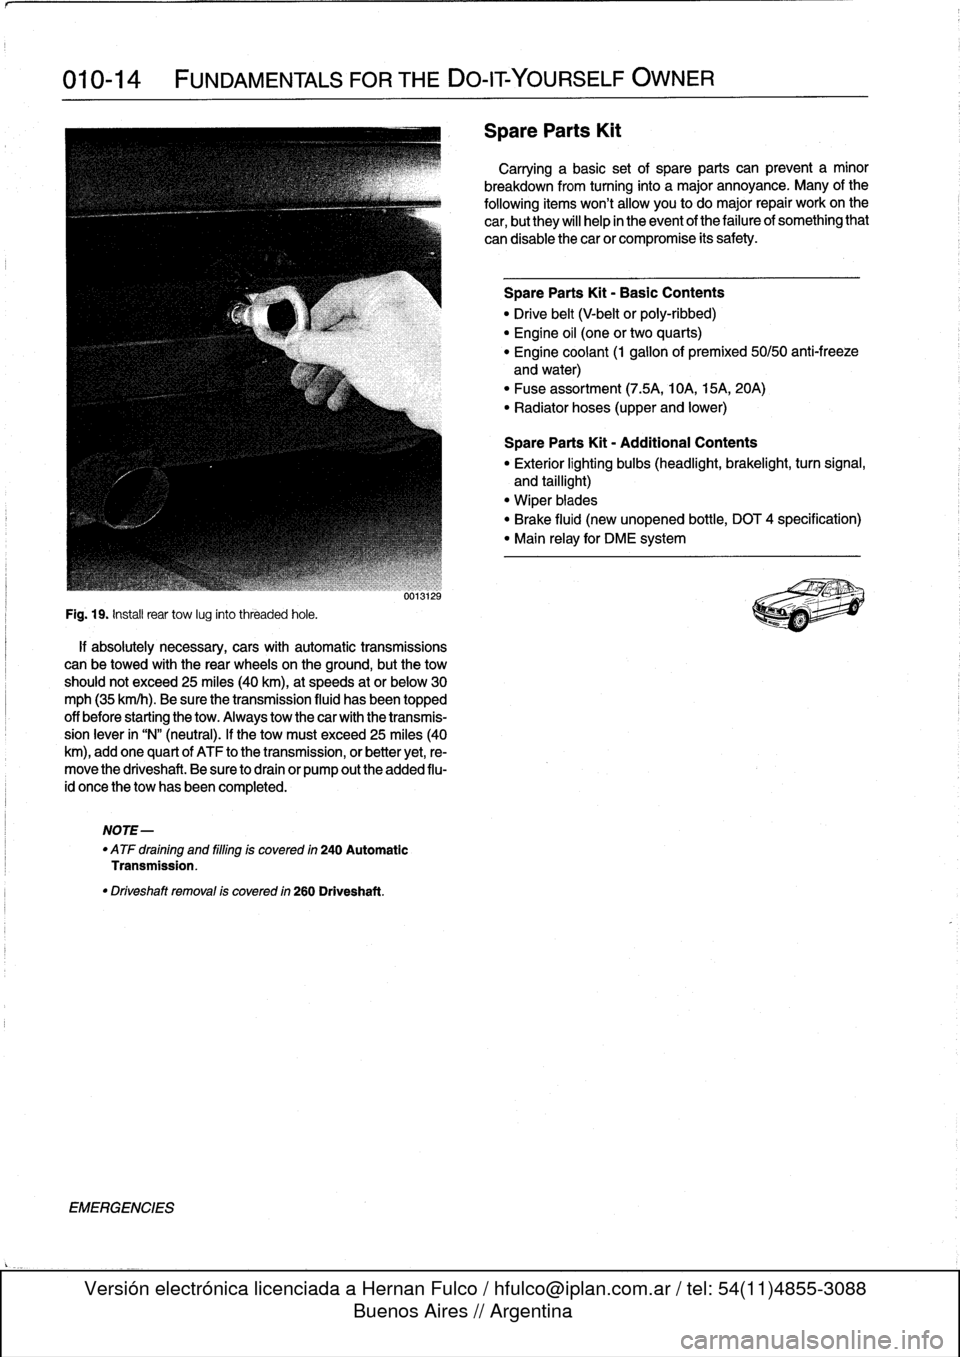 BMW 328i 1994 E36 Workshop Manual 
010-14

	

FUNDAMENTALS
FOR
THE
DO-ITYOURSELF
OWNER

Fig
.
19
.
Instaf
rear
tow
lug
into
threaded
hole
.

if
absolutely
necessary,
cars
with
automatic
transmissions
can
be
towed
with
the
rear
wheels
